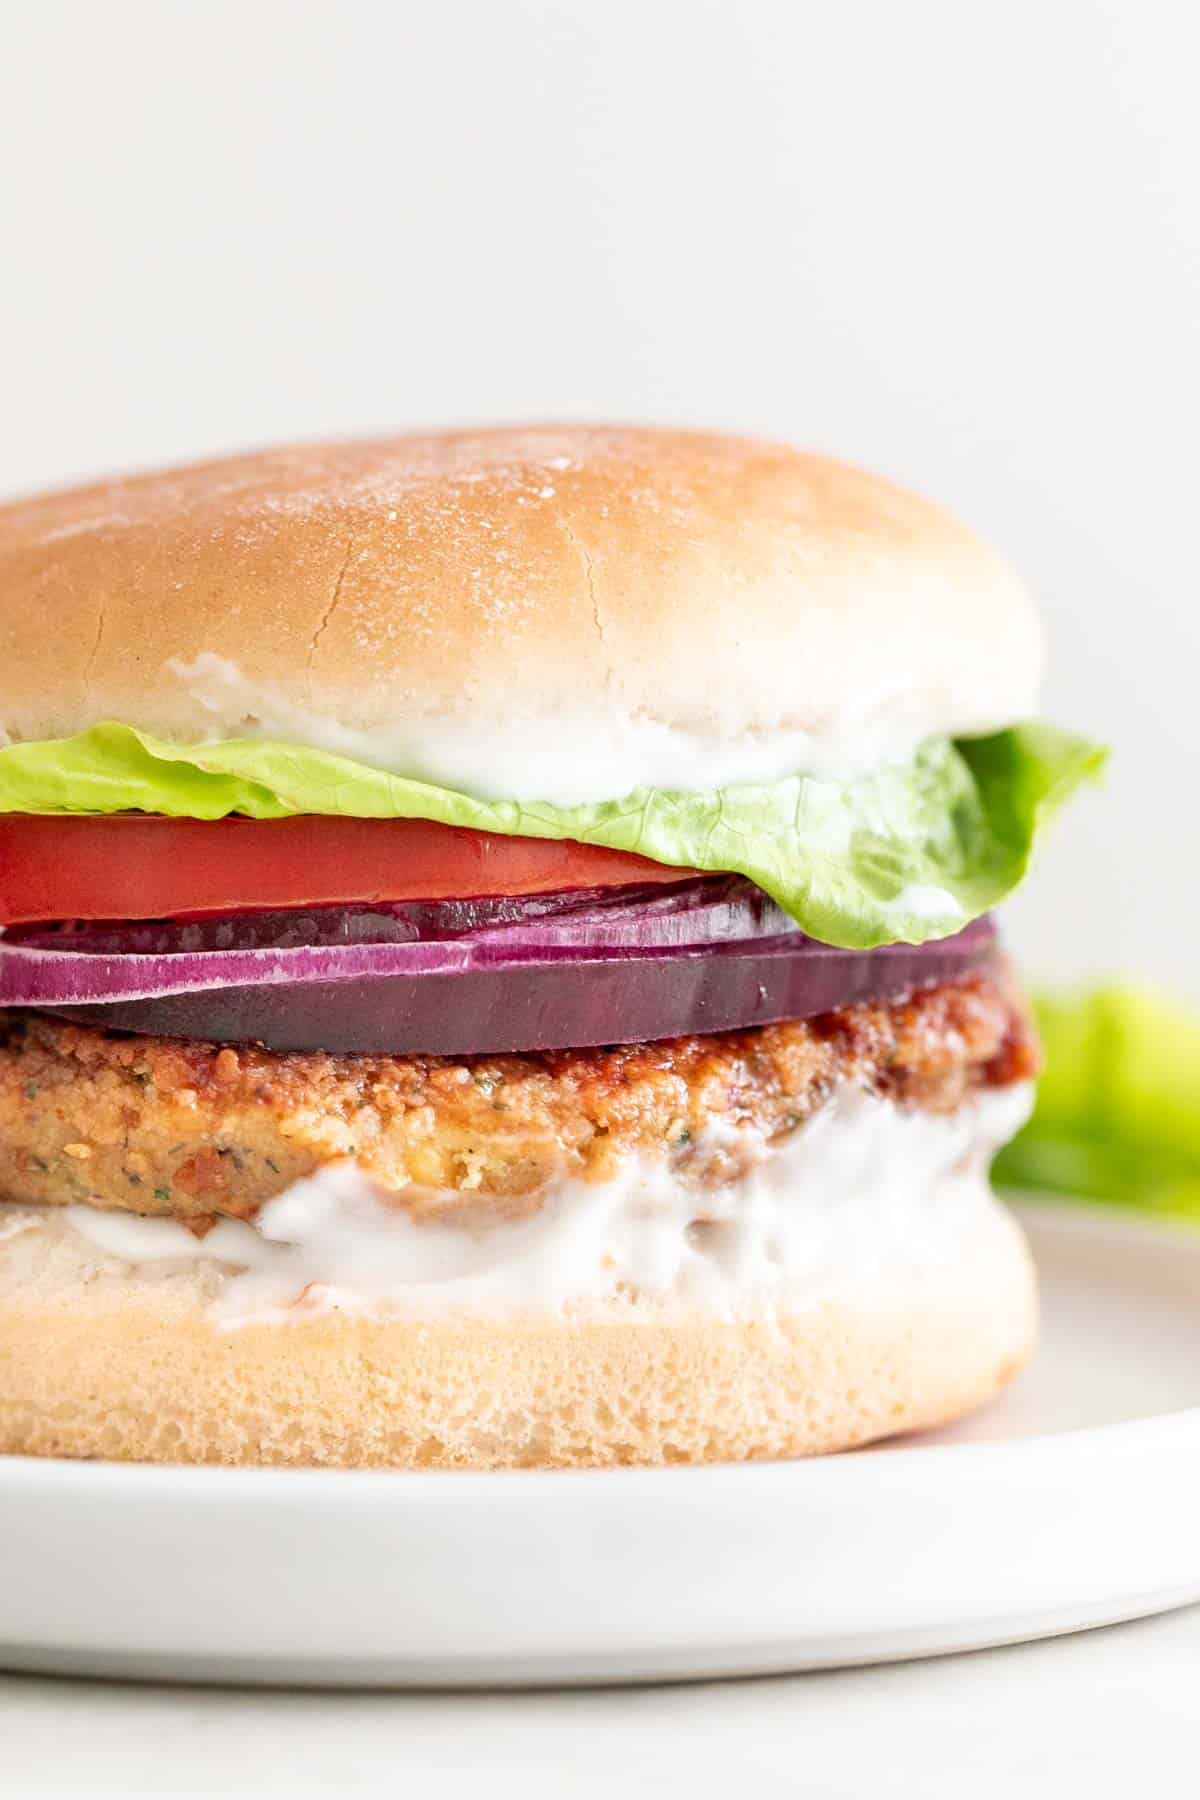 Vegan chickpea patty on bun with lettuce, tomato, red onion, and vegan mayo.